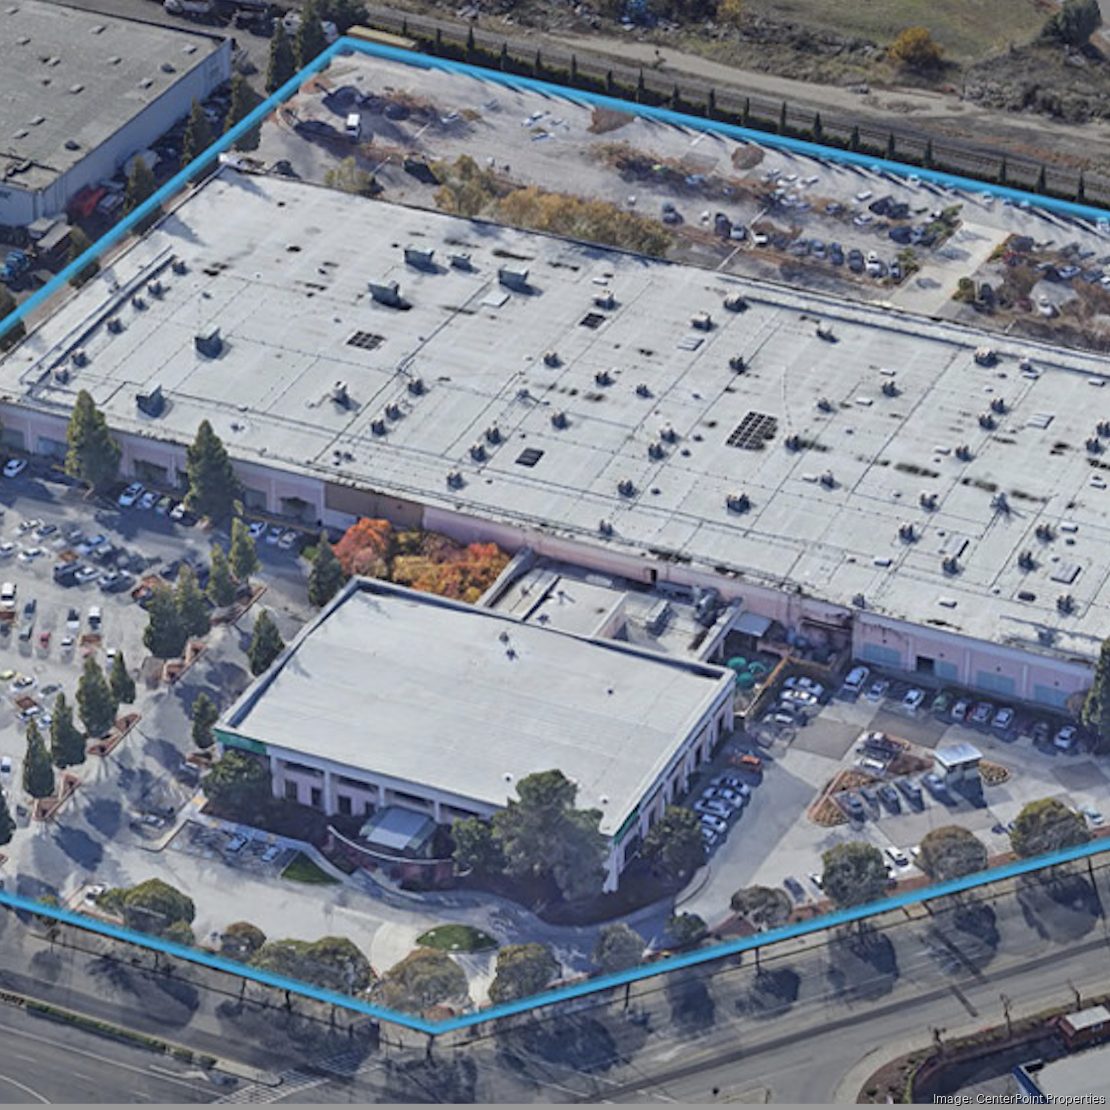 CapRock Partners Buys 165,070 SF Industrial Facility in San Dimas